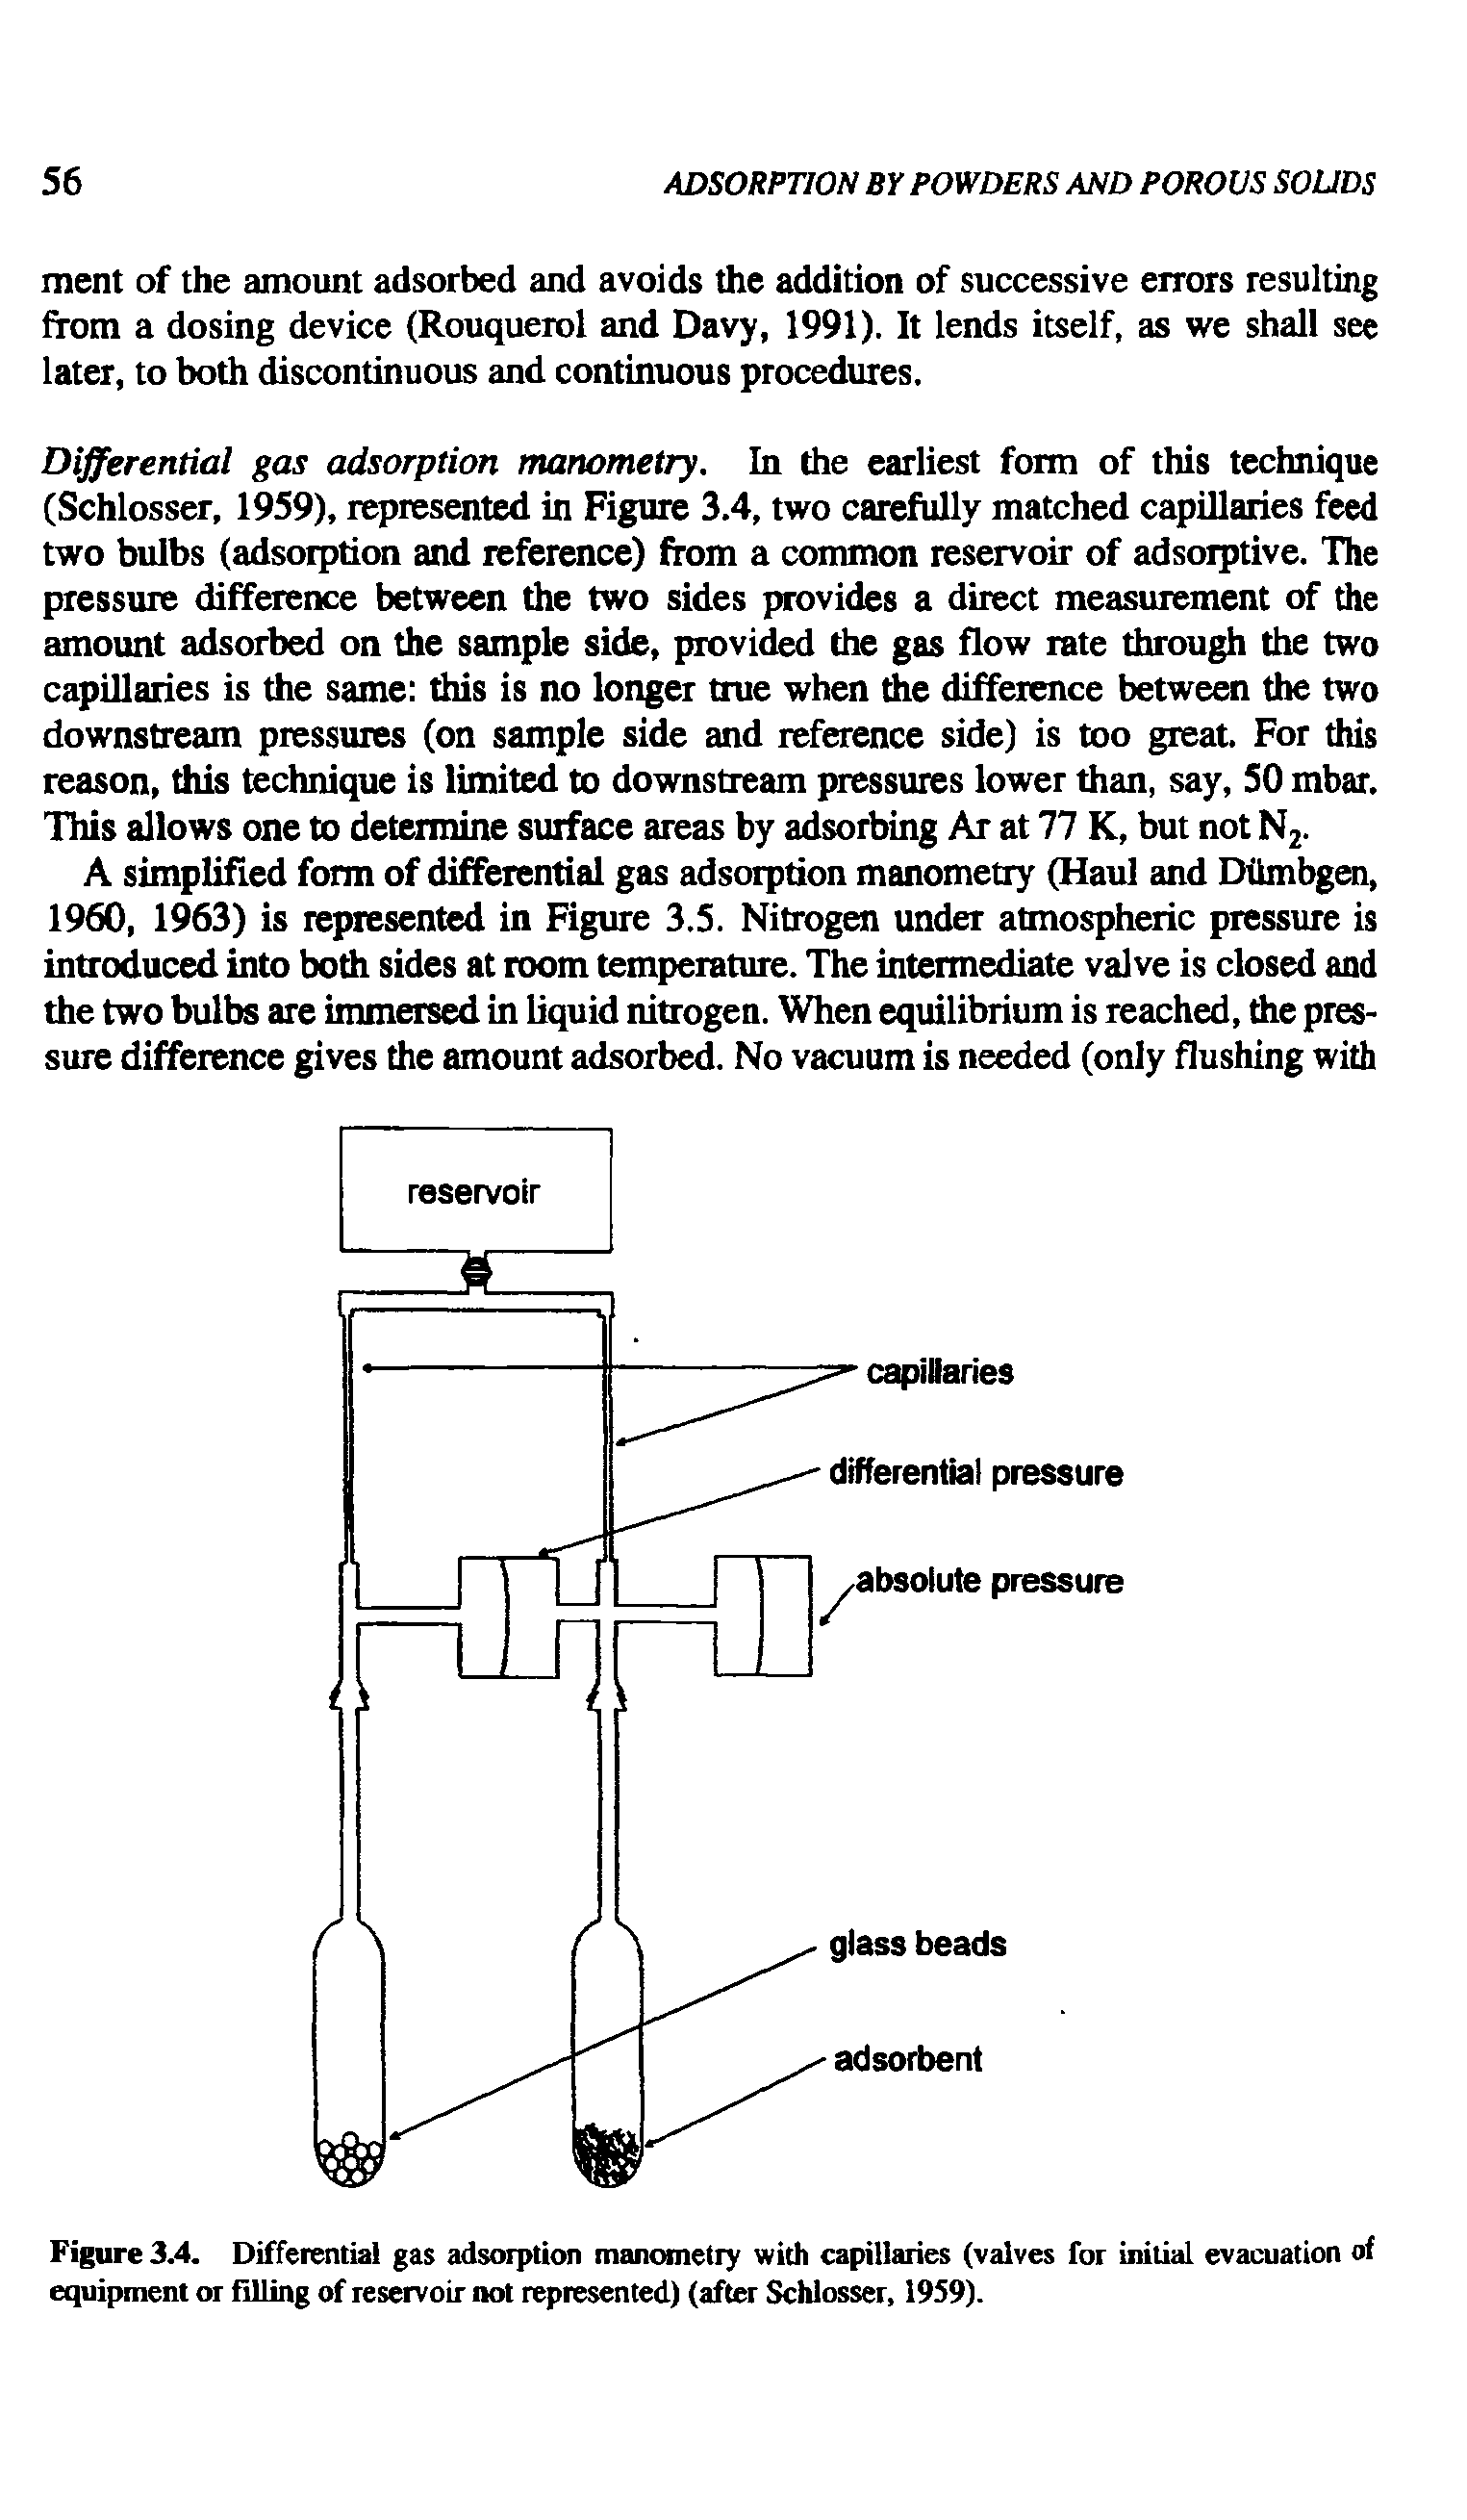 Figure 3.4. Differential gas adsorption manometry with capillaries (valves for initial evacuation of equipment or filling of reservoir not represented) (after Schlosser, 1959).